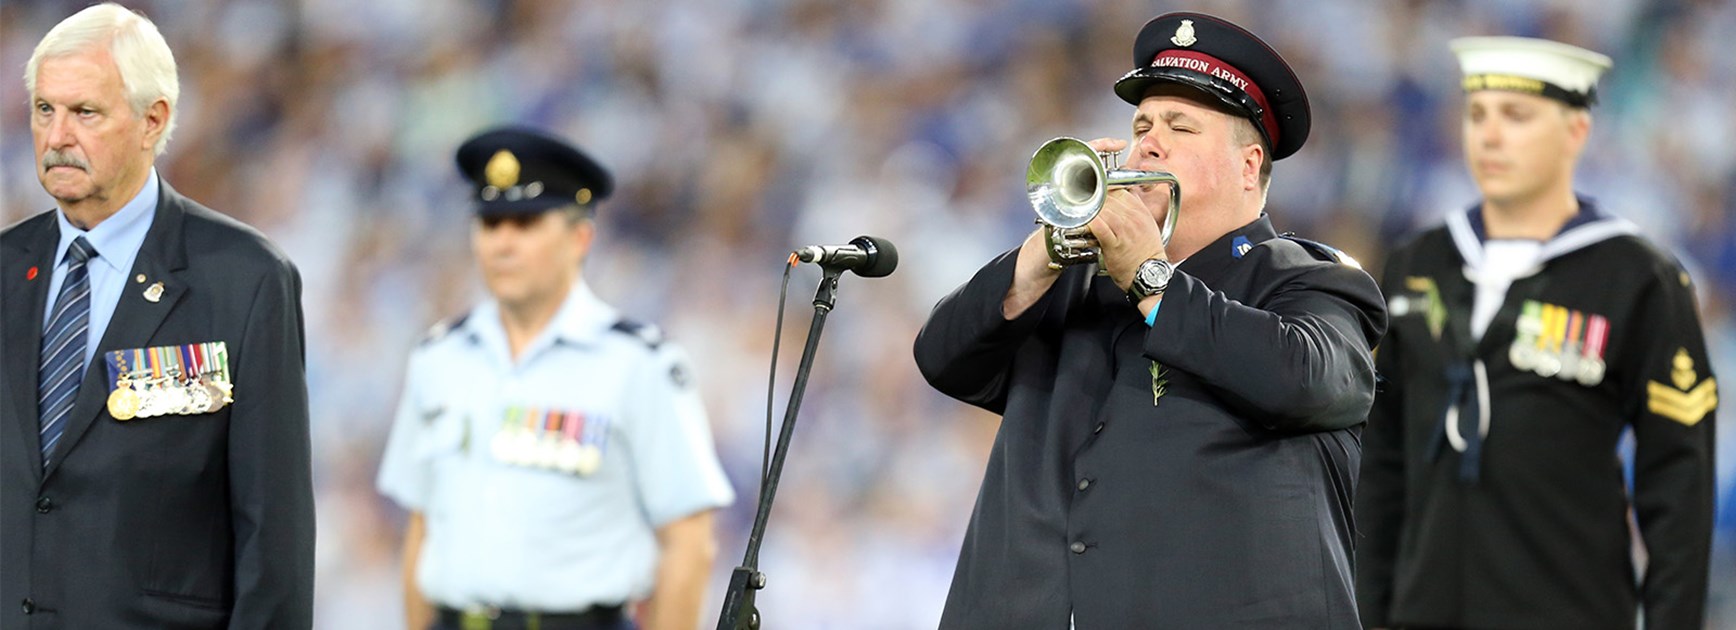 The last post is performed during Anzac Day ceremonies.